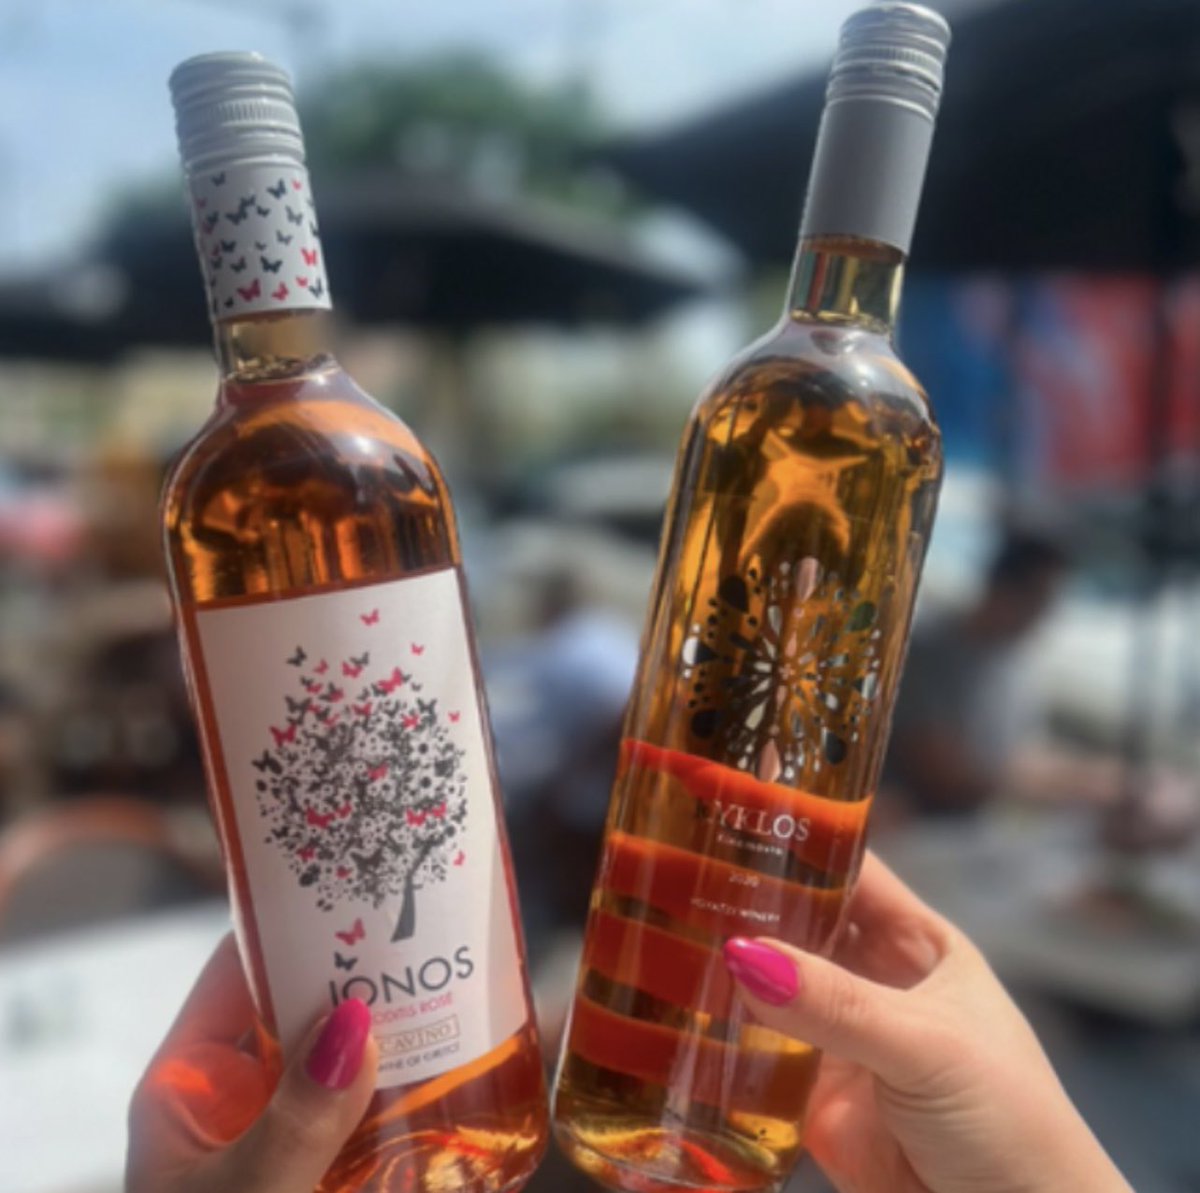 Rosé all day when @9MusesChicago patio is open for May! Make sure to stop by for some delicious Greek dishes and indulge in IONOS Roditis Rosé and KYKLOS Xinomavro Rosé for $25 a bottle.
#roseallday #rose #greekwine #9muses #greektownrestaurants #springissprung #greektownchicago